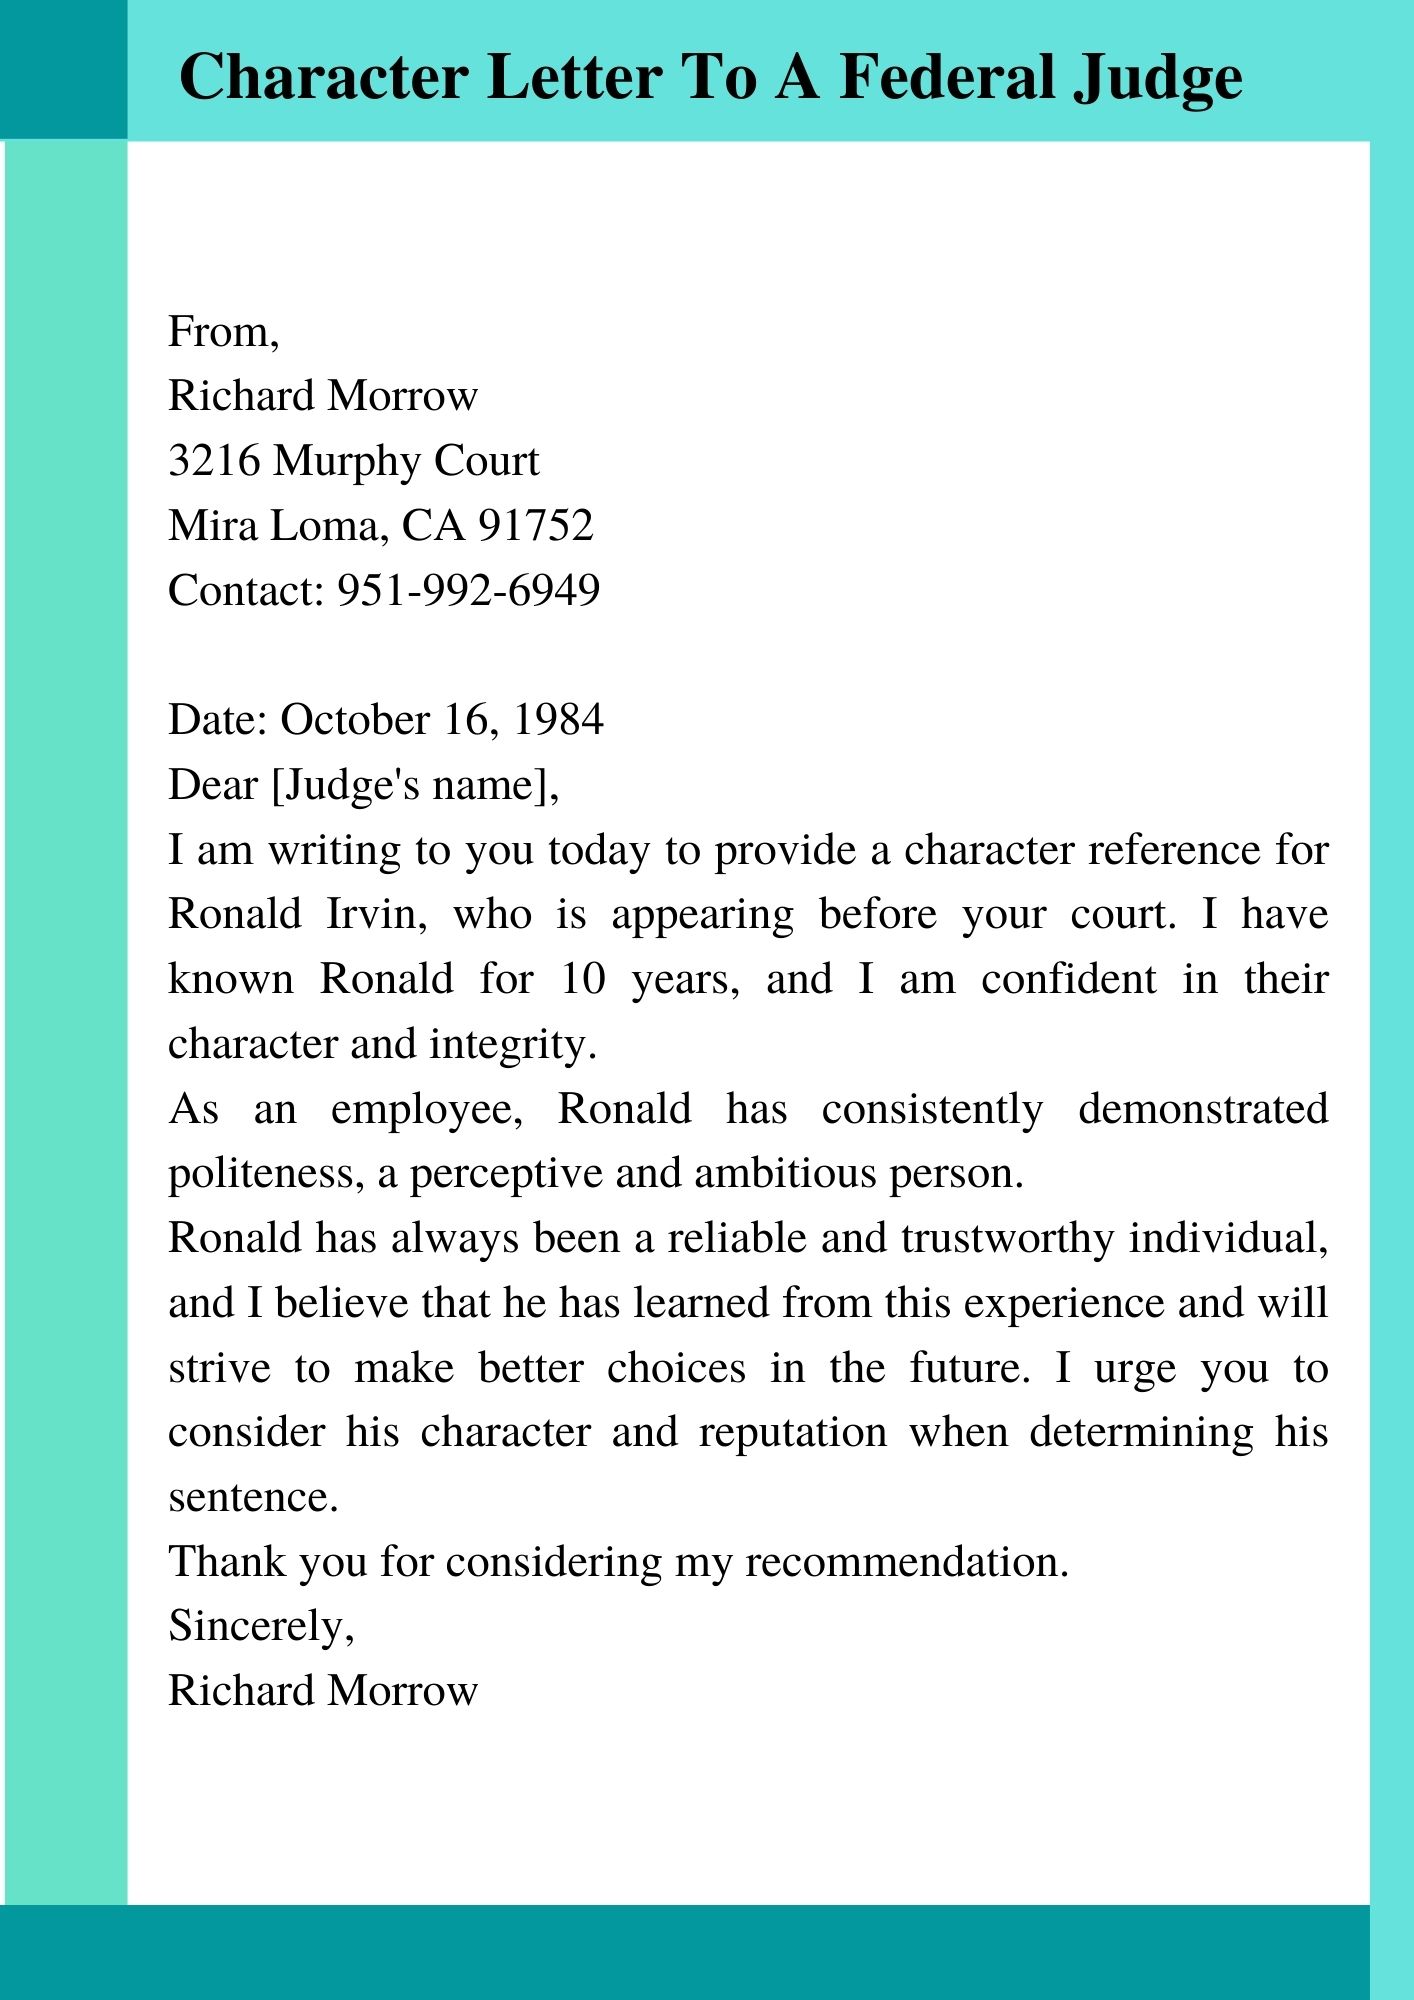 Character Letter To Federal Judge Template